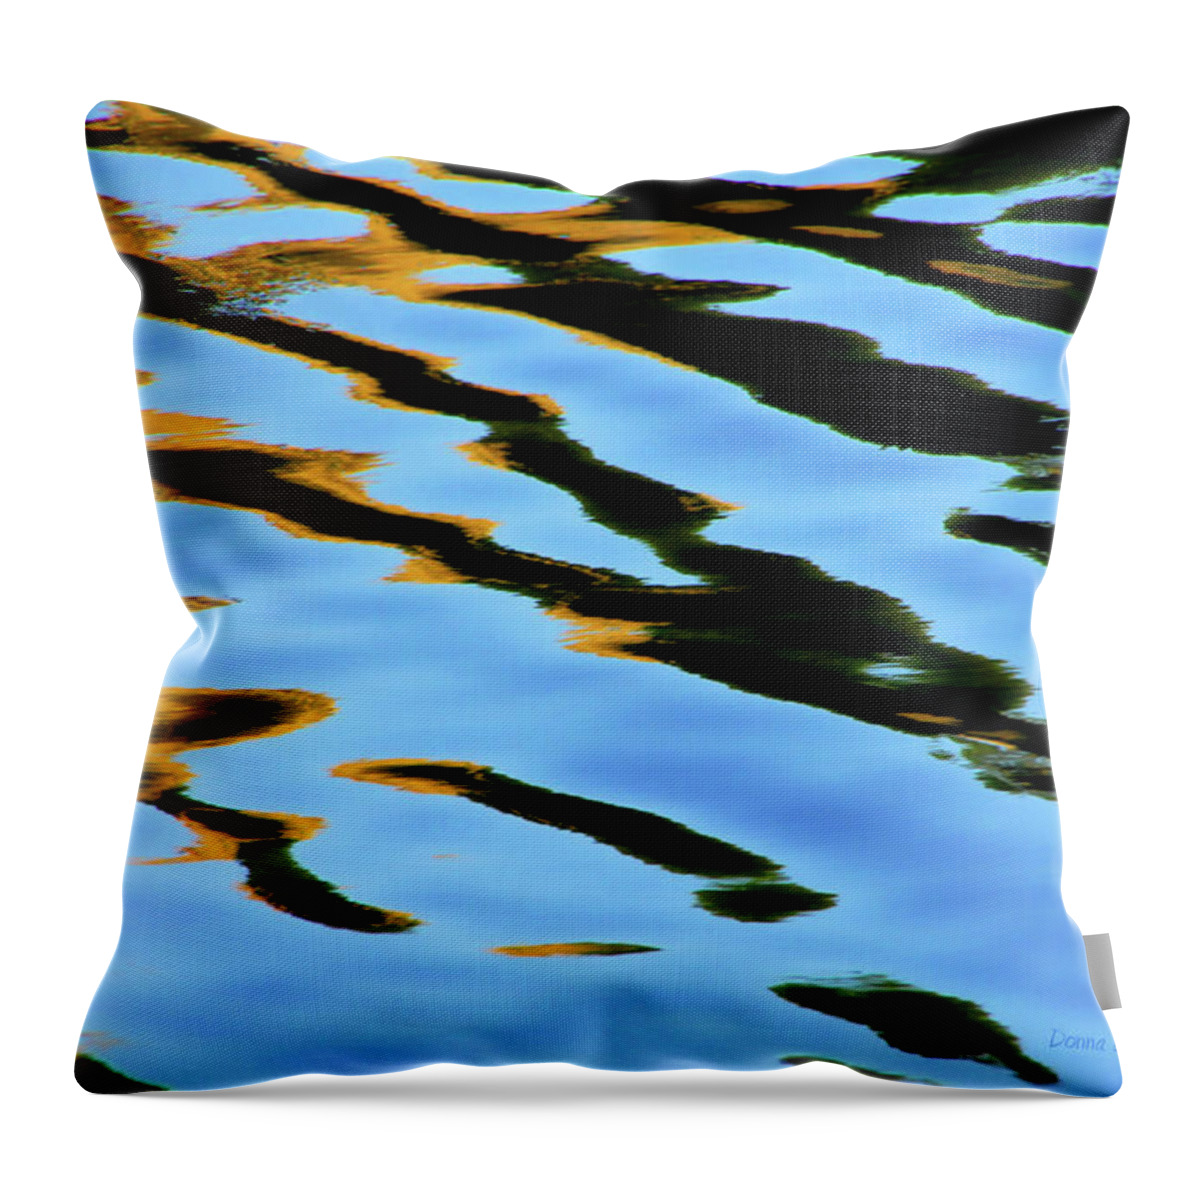 Water Throw Pillow featuring the photograph Tiger Stripes by Donna Blackhall